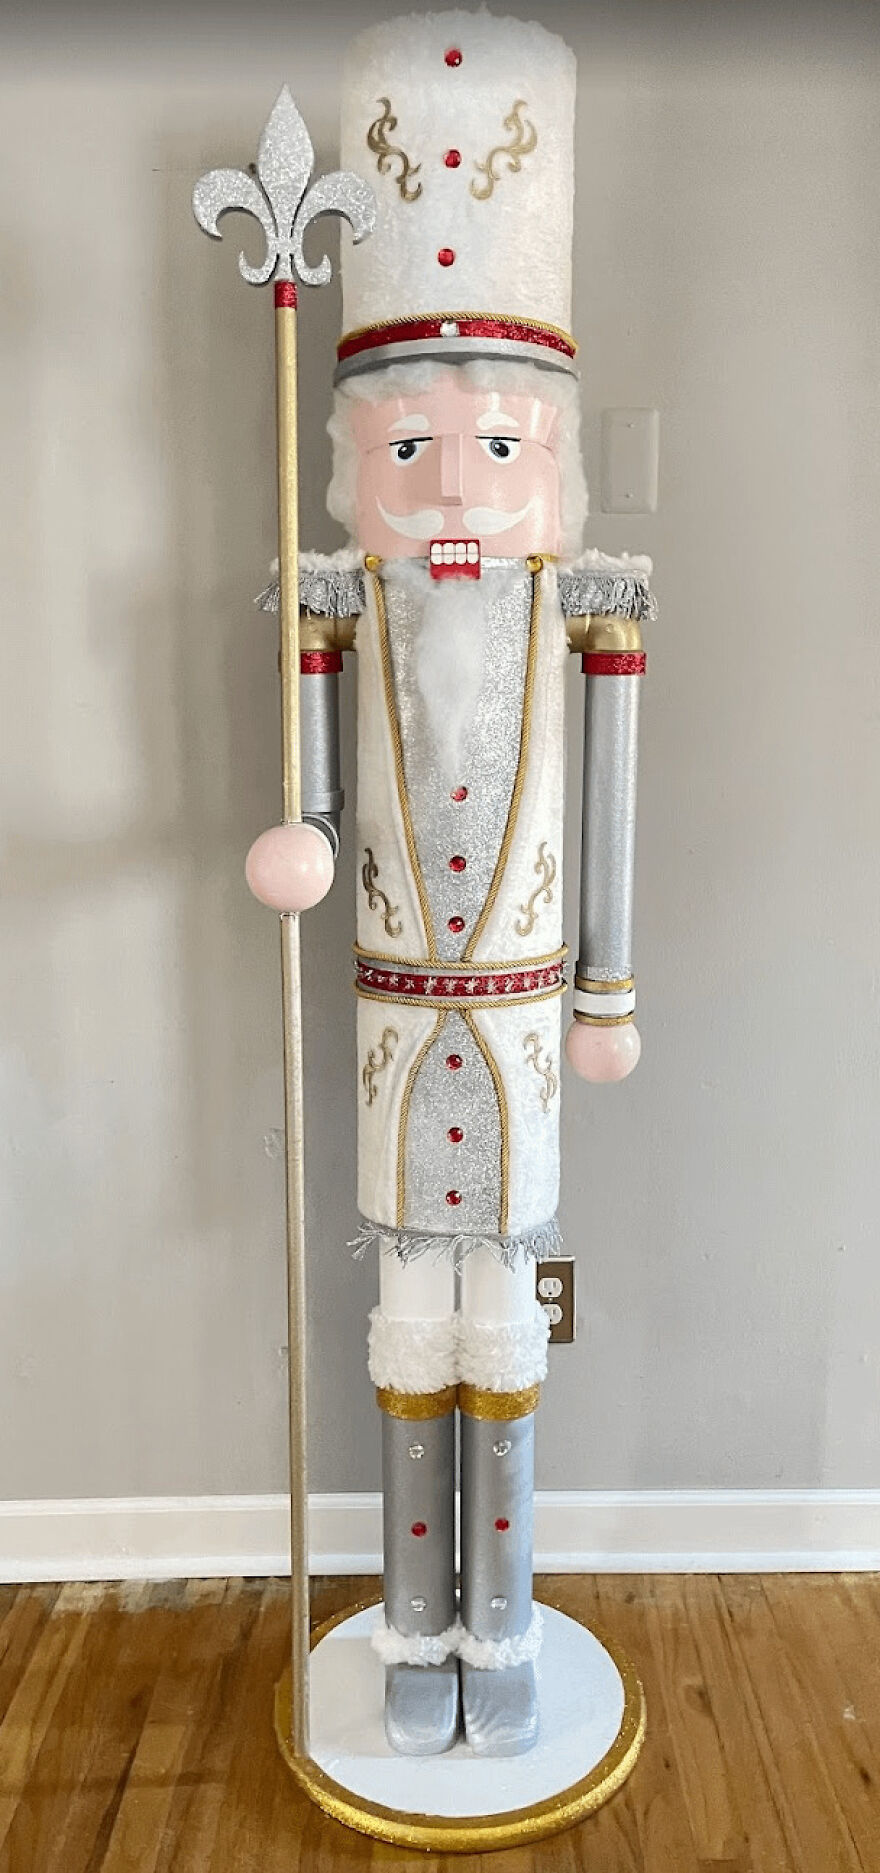 Wife Wanted To Buy A 6ft Nutcracker, ... I Told Her I Could Make Her One!